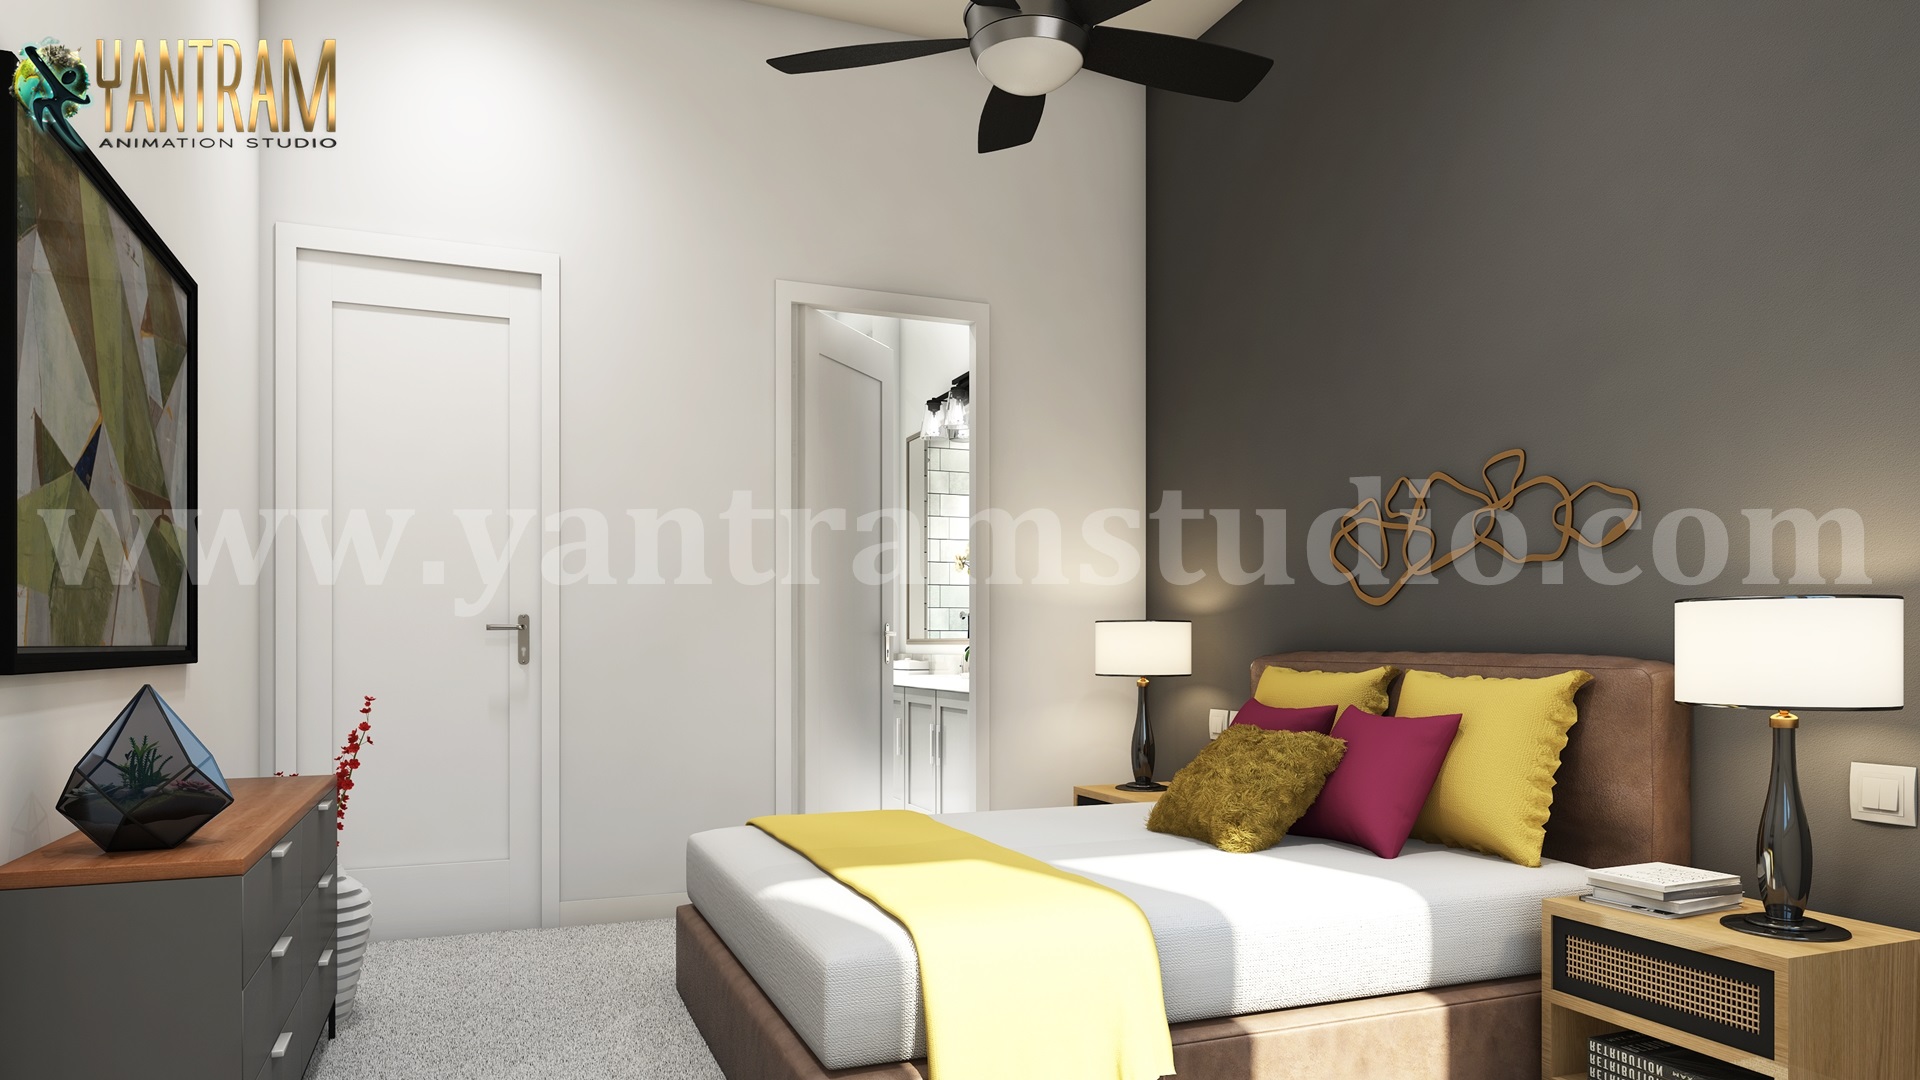 Contemporary Master Bedroom 3d interior rendering services by 3d architectural visualization.jpg -  by Yantramarchitecturaldesignstudio